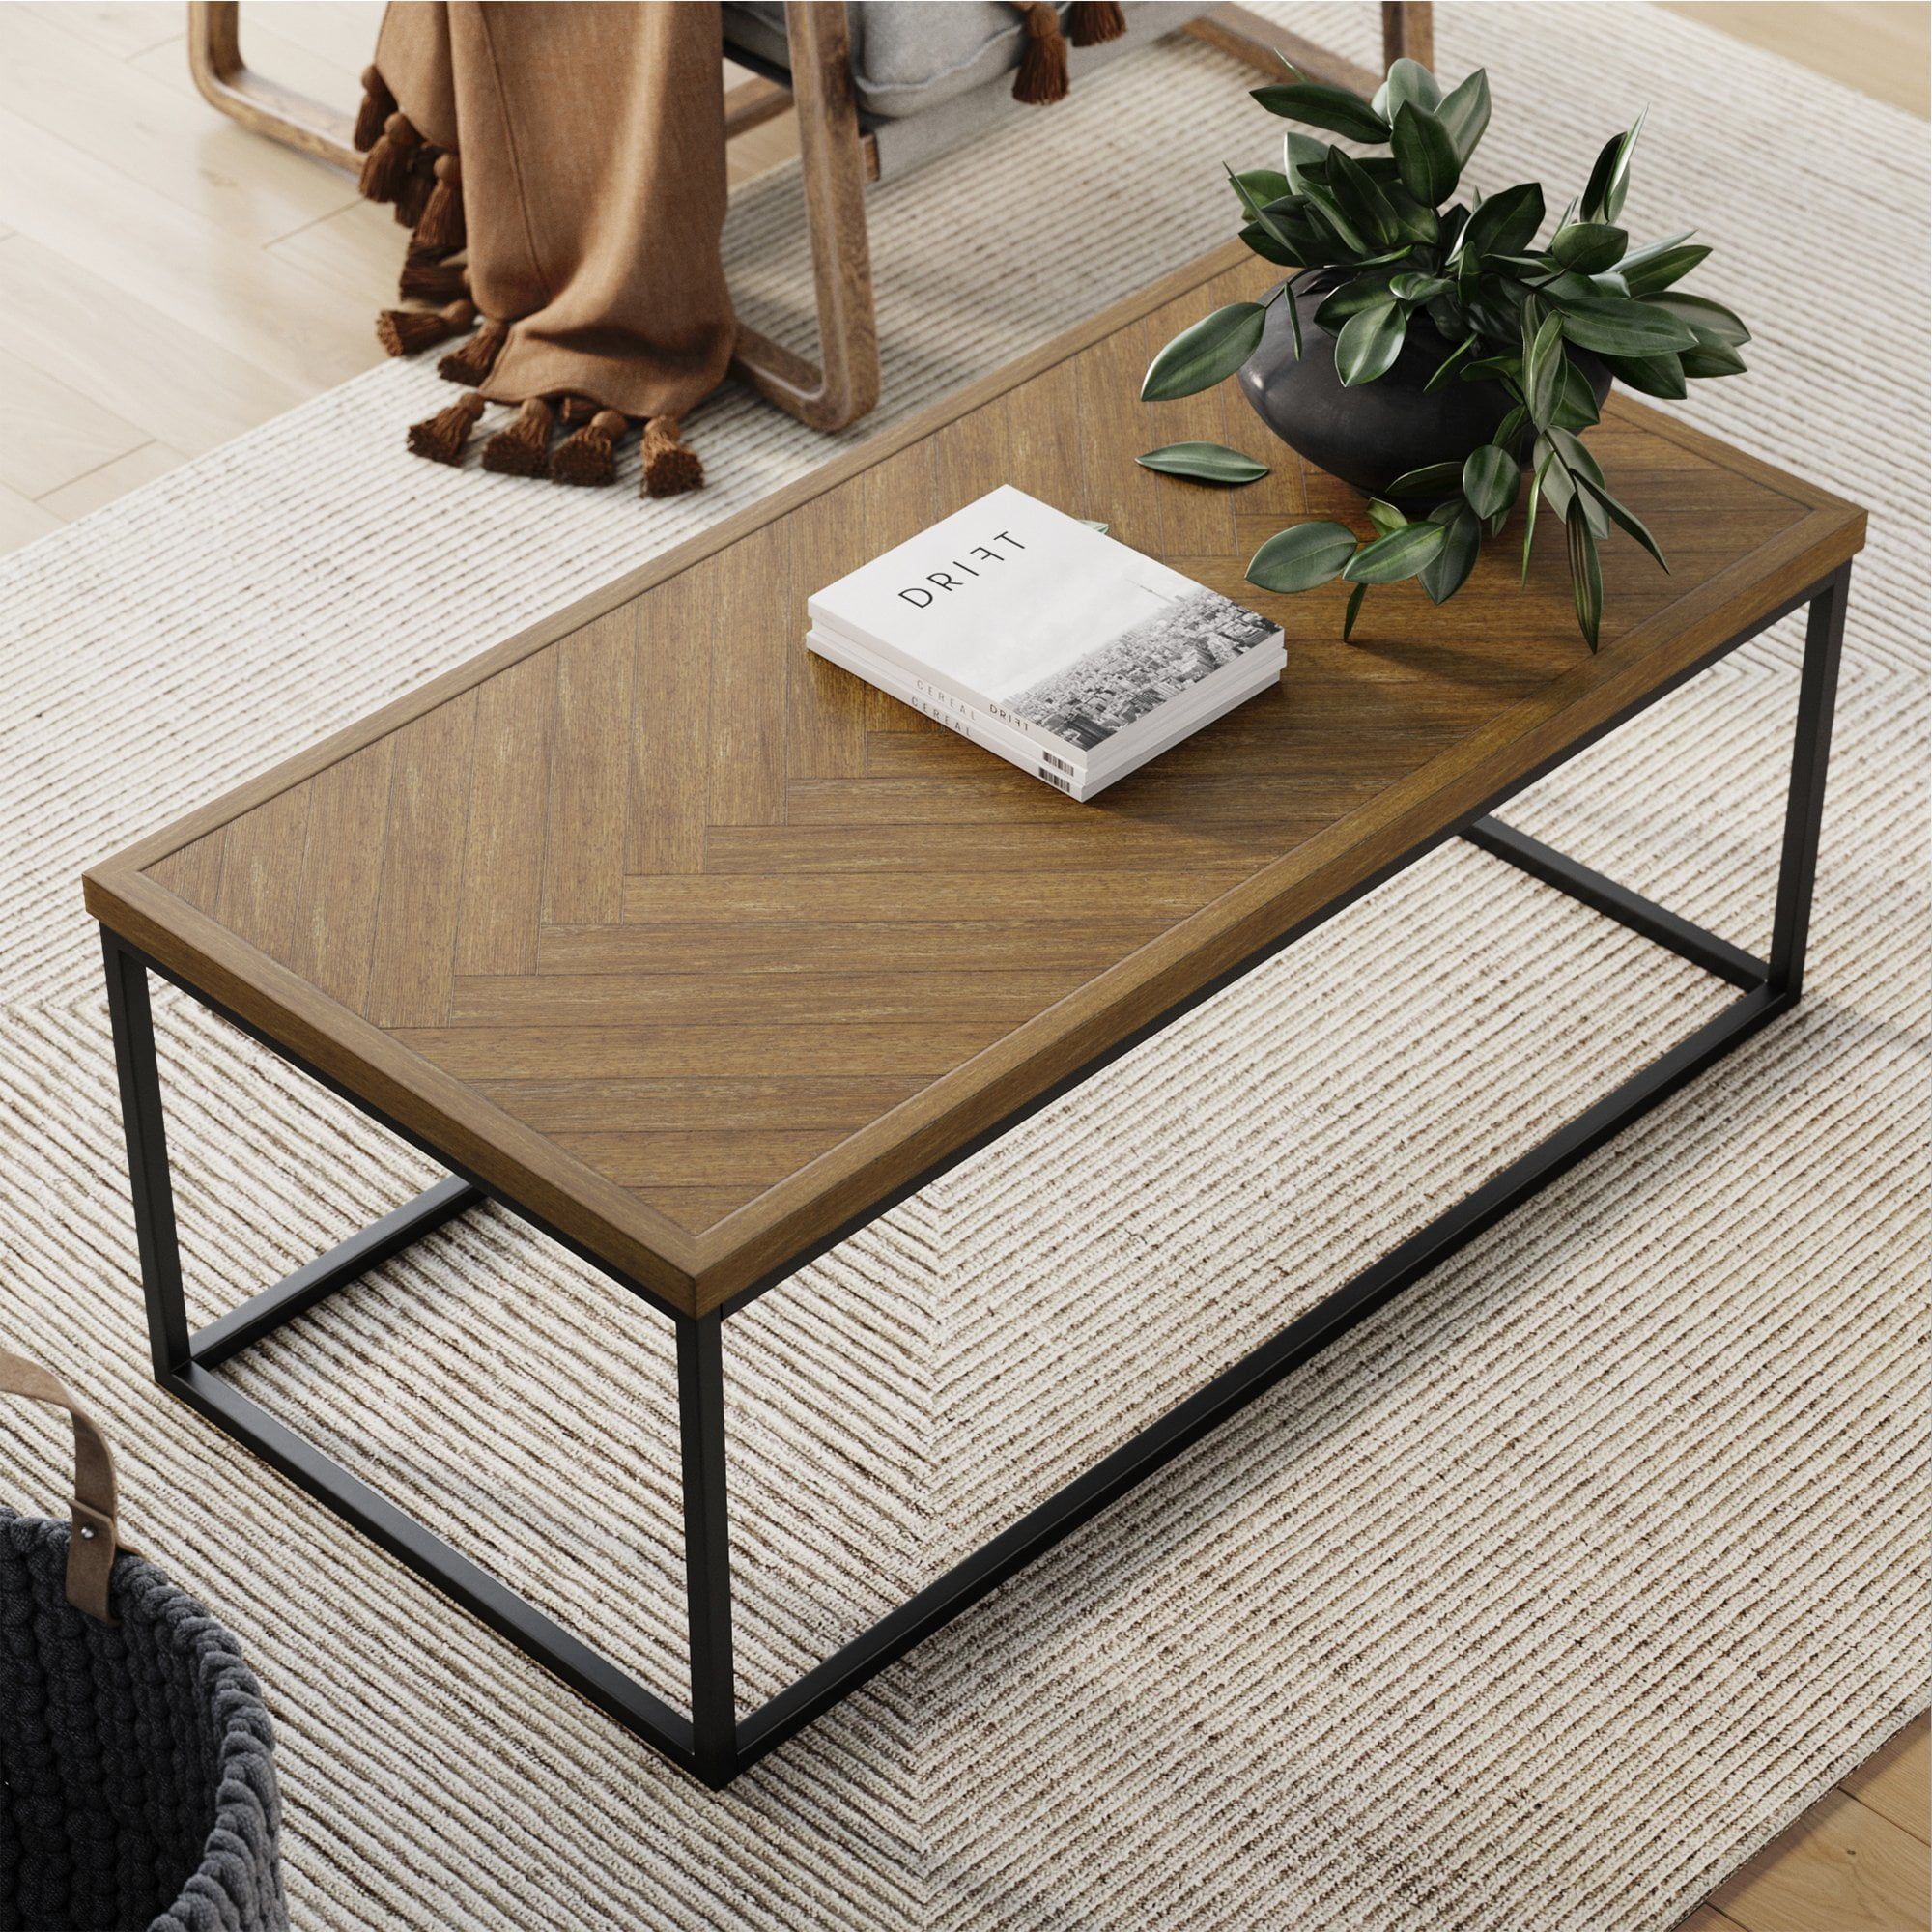 Modern Industrial Coffee Table Wood / Ofm Industrial Modern Wood Top Within Modern Wooden X Design Coffee Tables (Gallery 18 of 20)